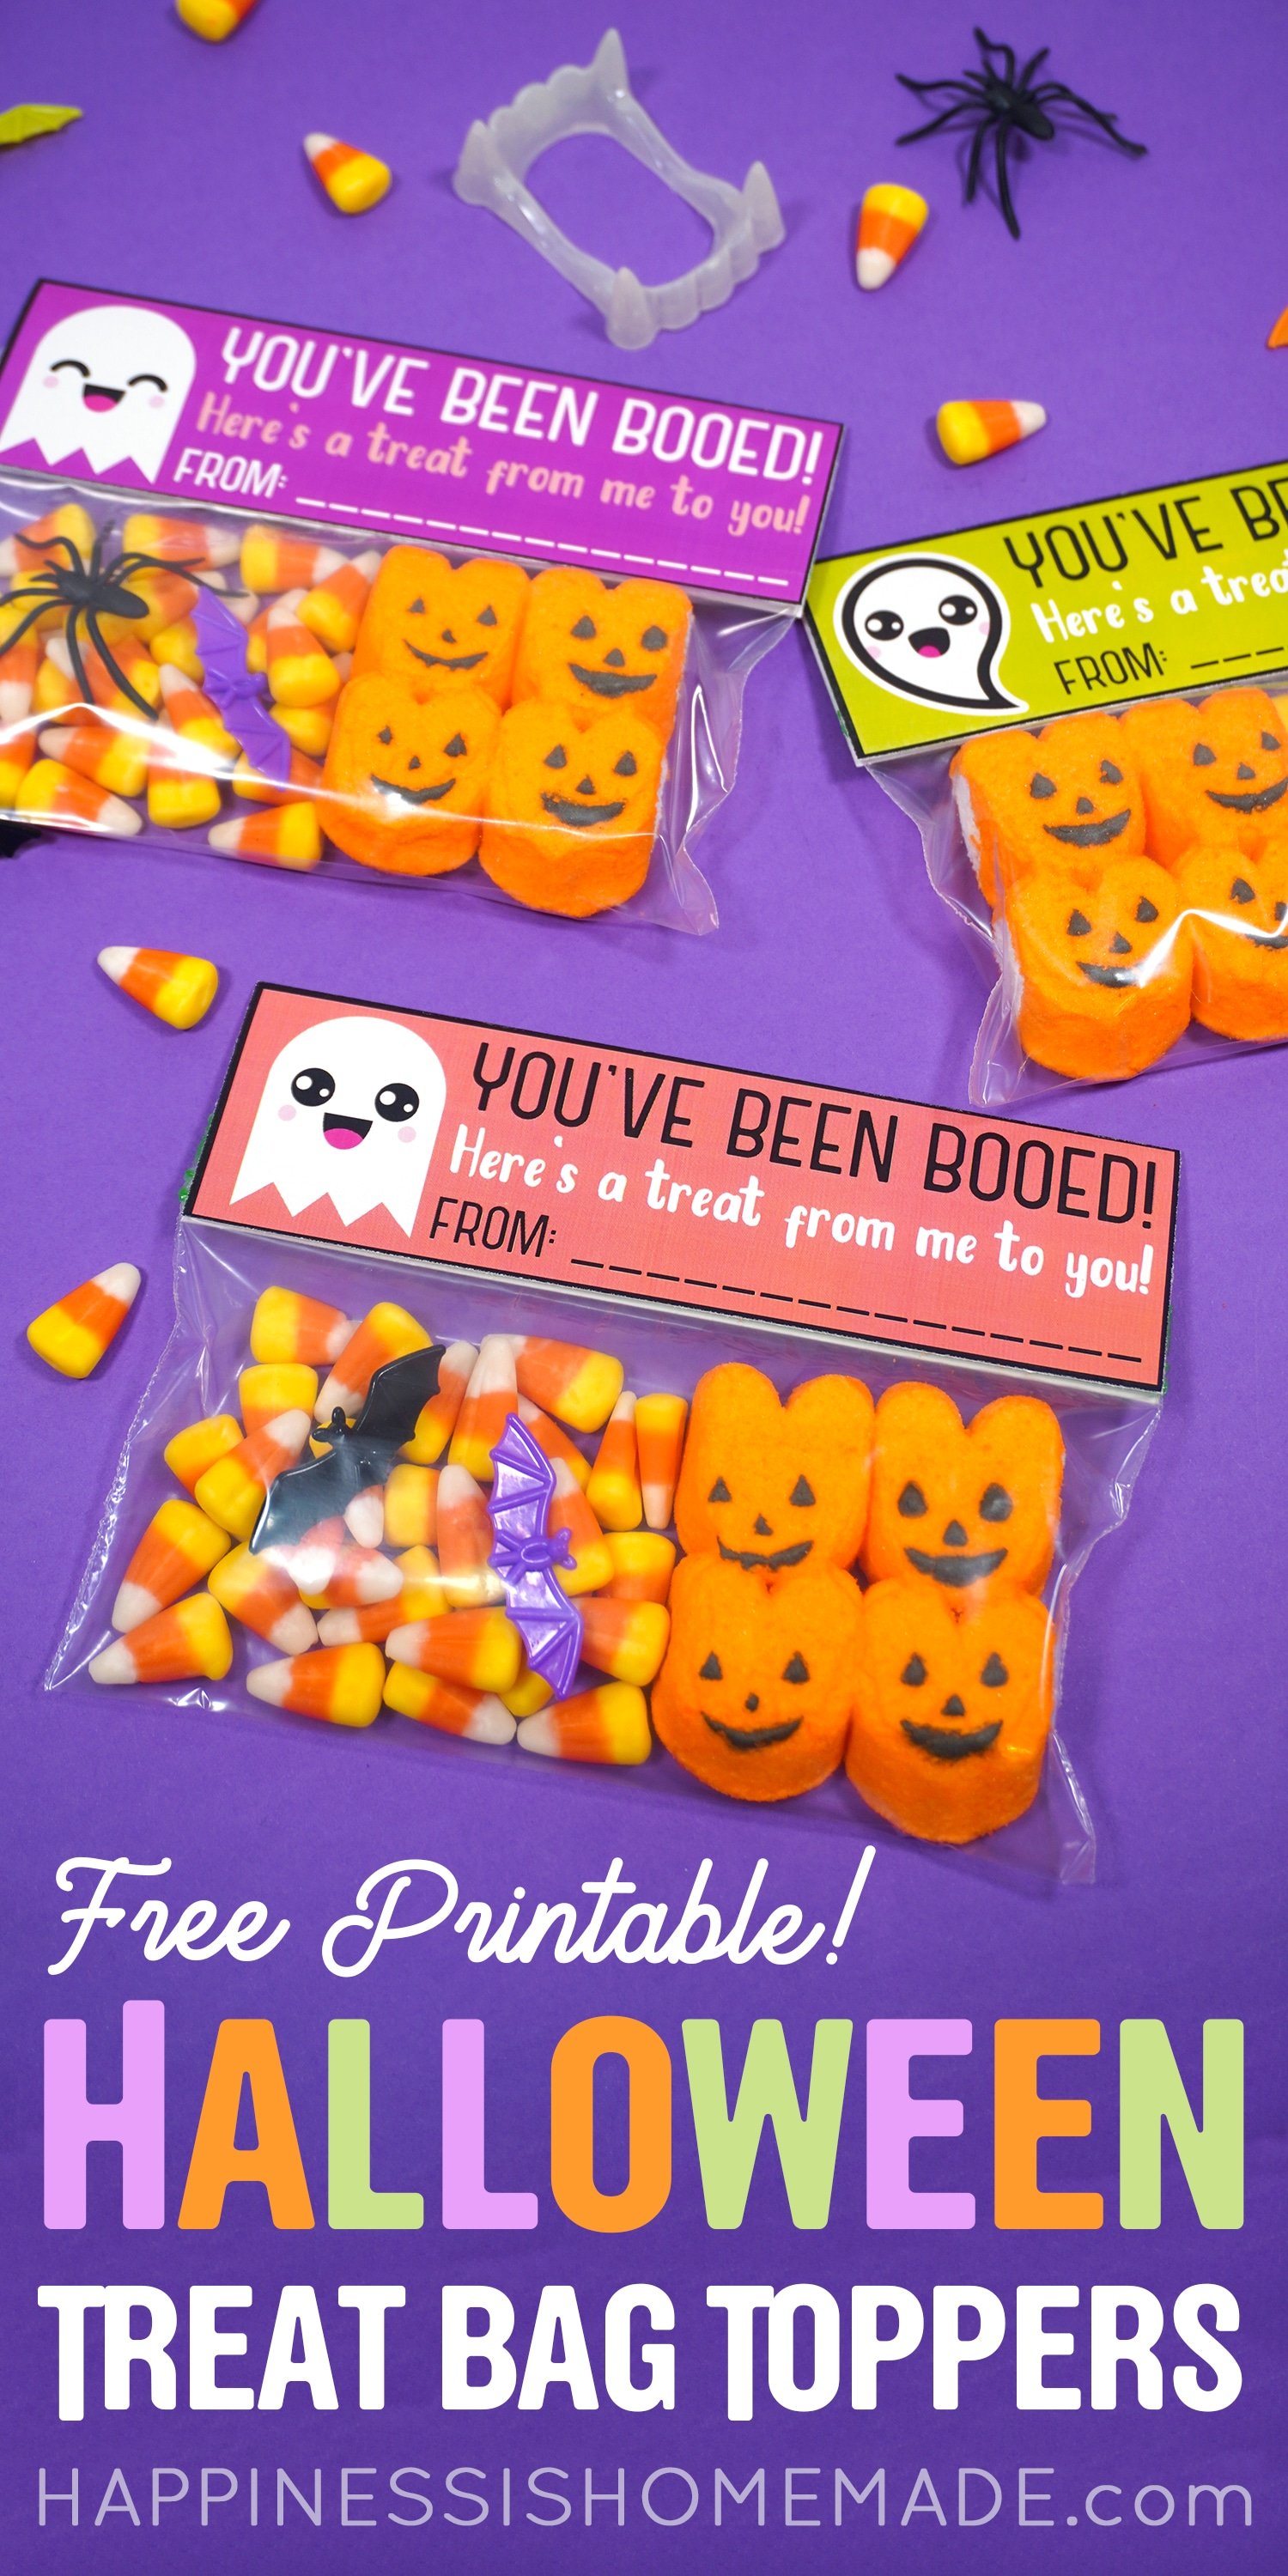 25 Halloween Trick-or-Treat Bags: The Goodie Bag Ideas You Need